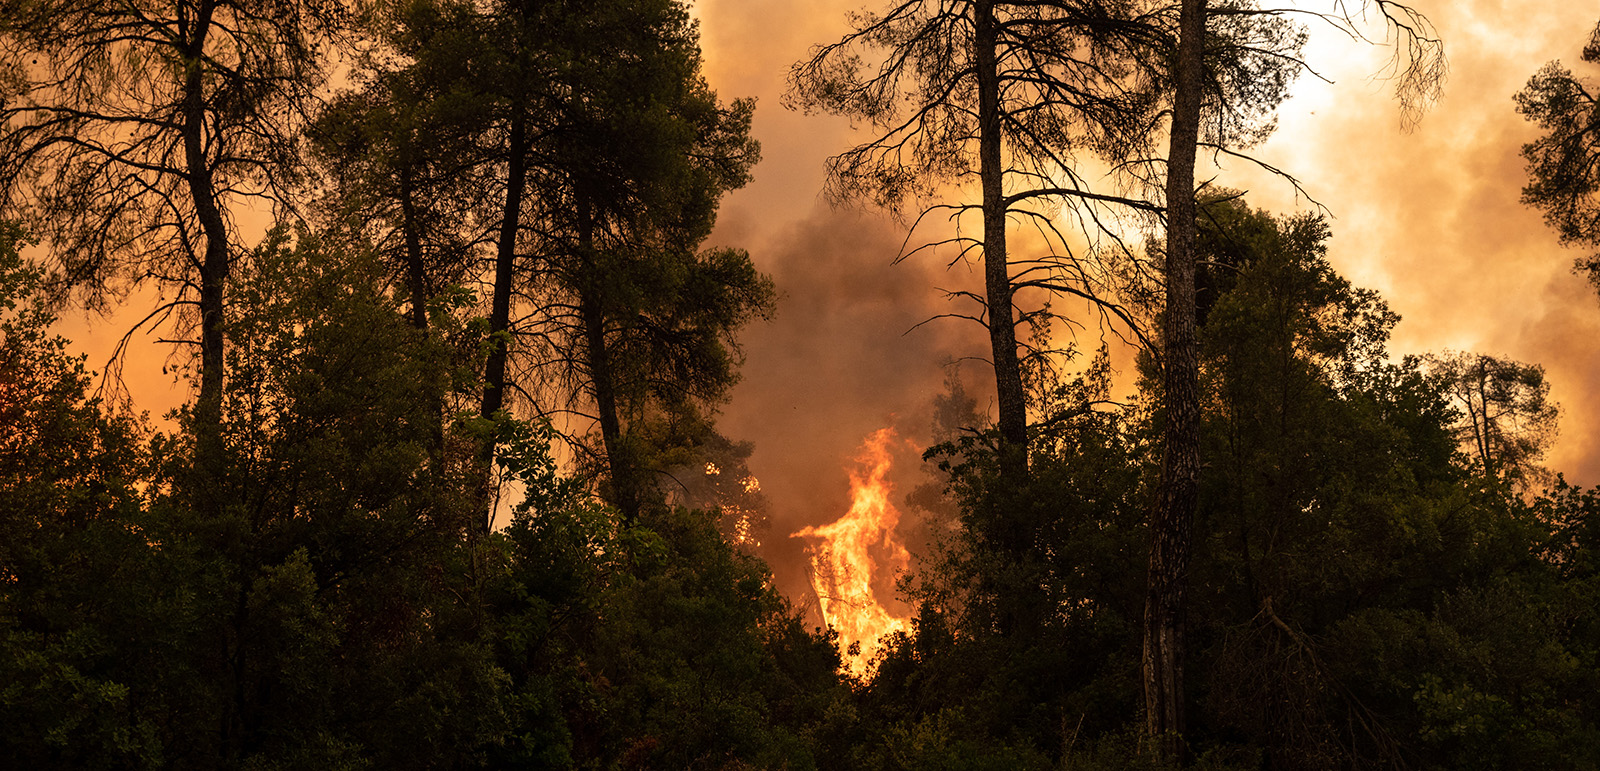 A wildfire burns in a forest on the island of Evia, Greece. Photographer: Konstantinos Tsakalidis/Bloomberg/Getty Images